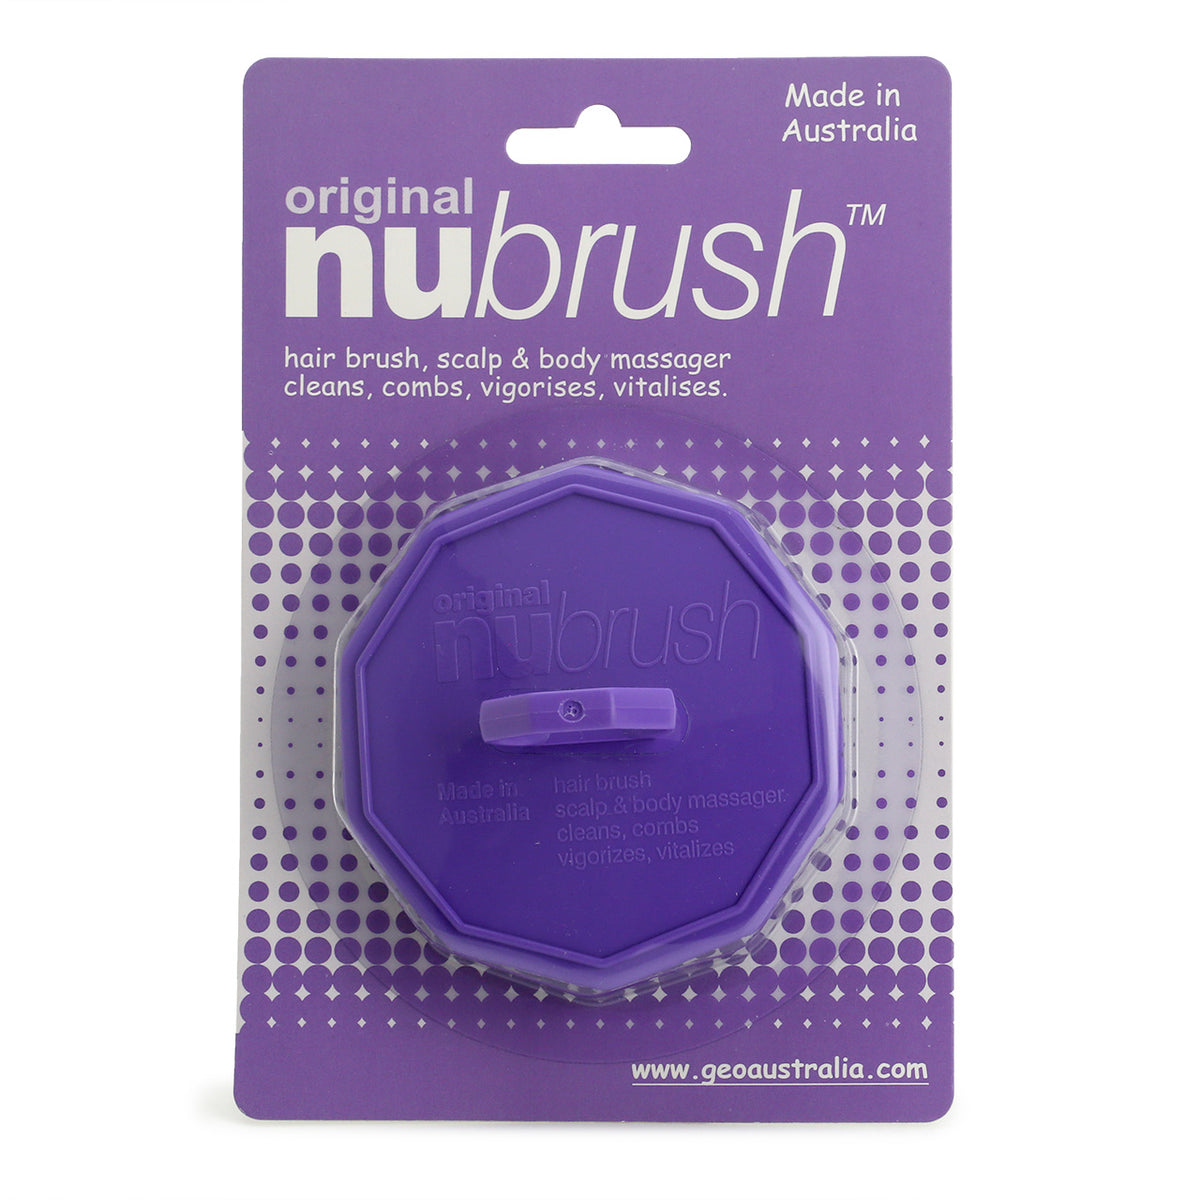 The Nubrush in its cardboard and plastic Blister packaging